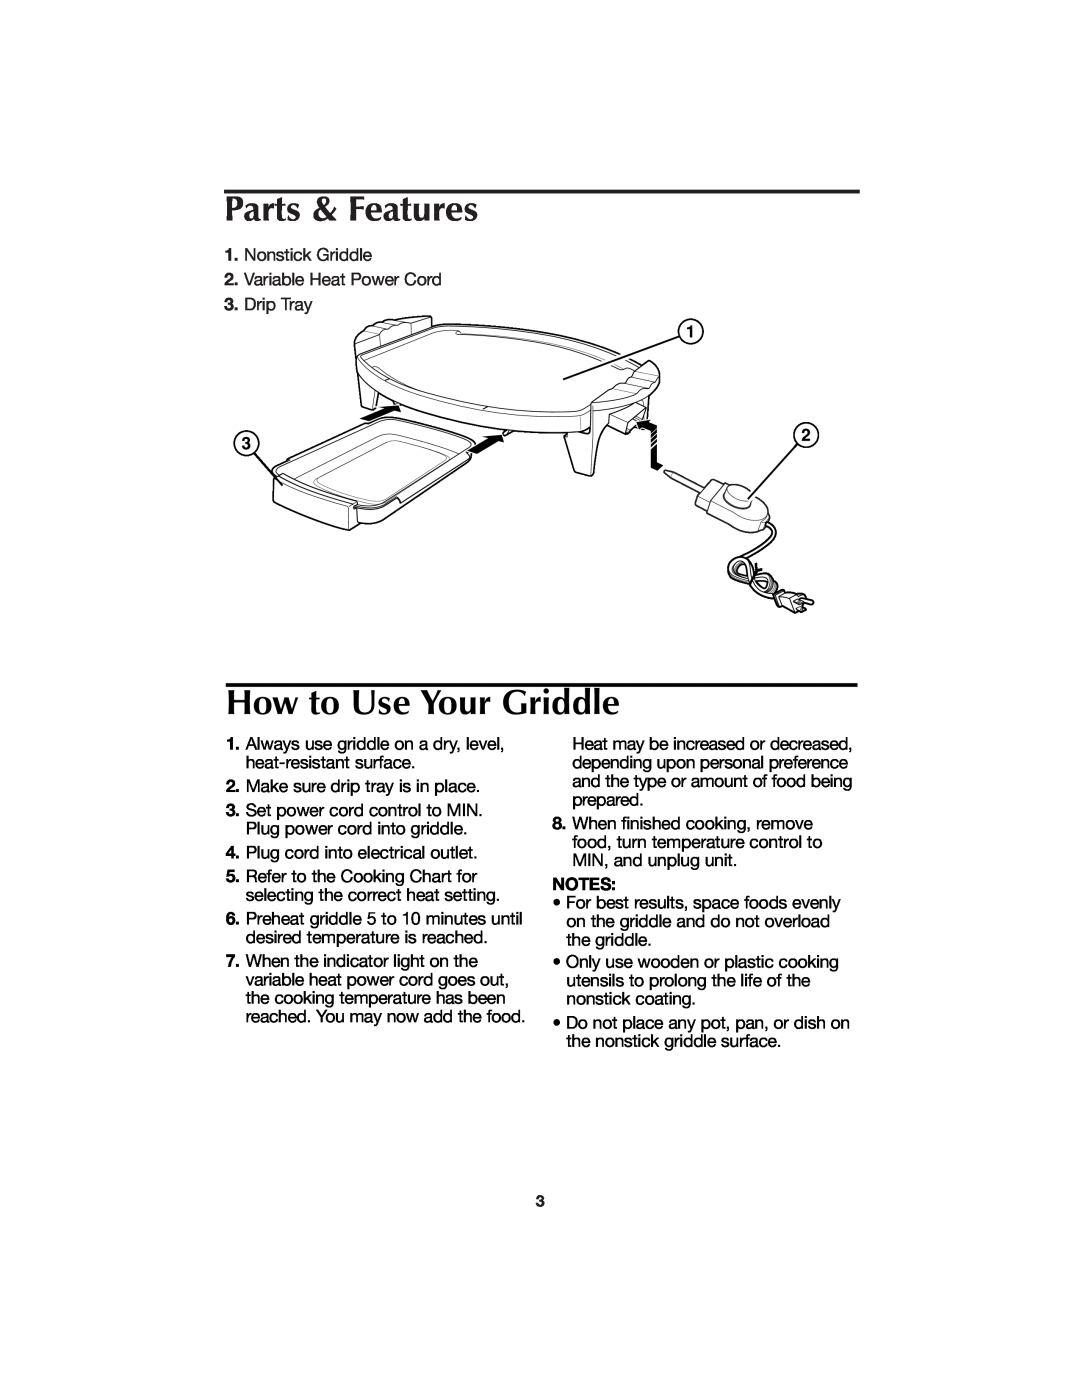 Hamilton Beach 840112100 manual Parts & Features, How to Use Your Griddle 